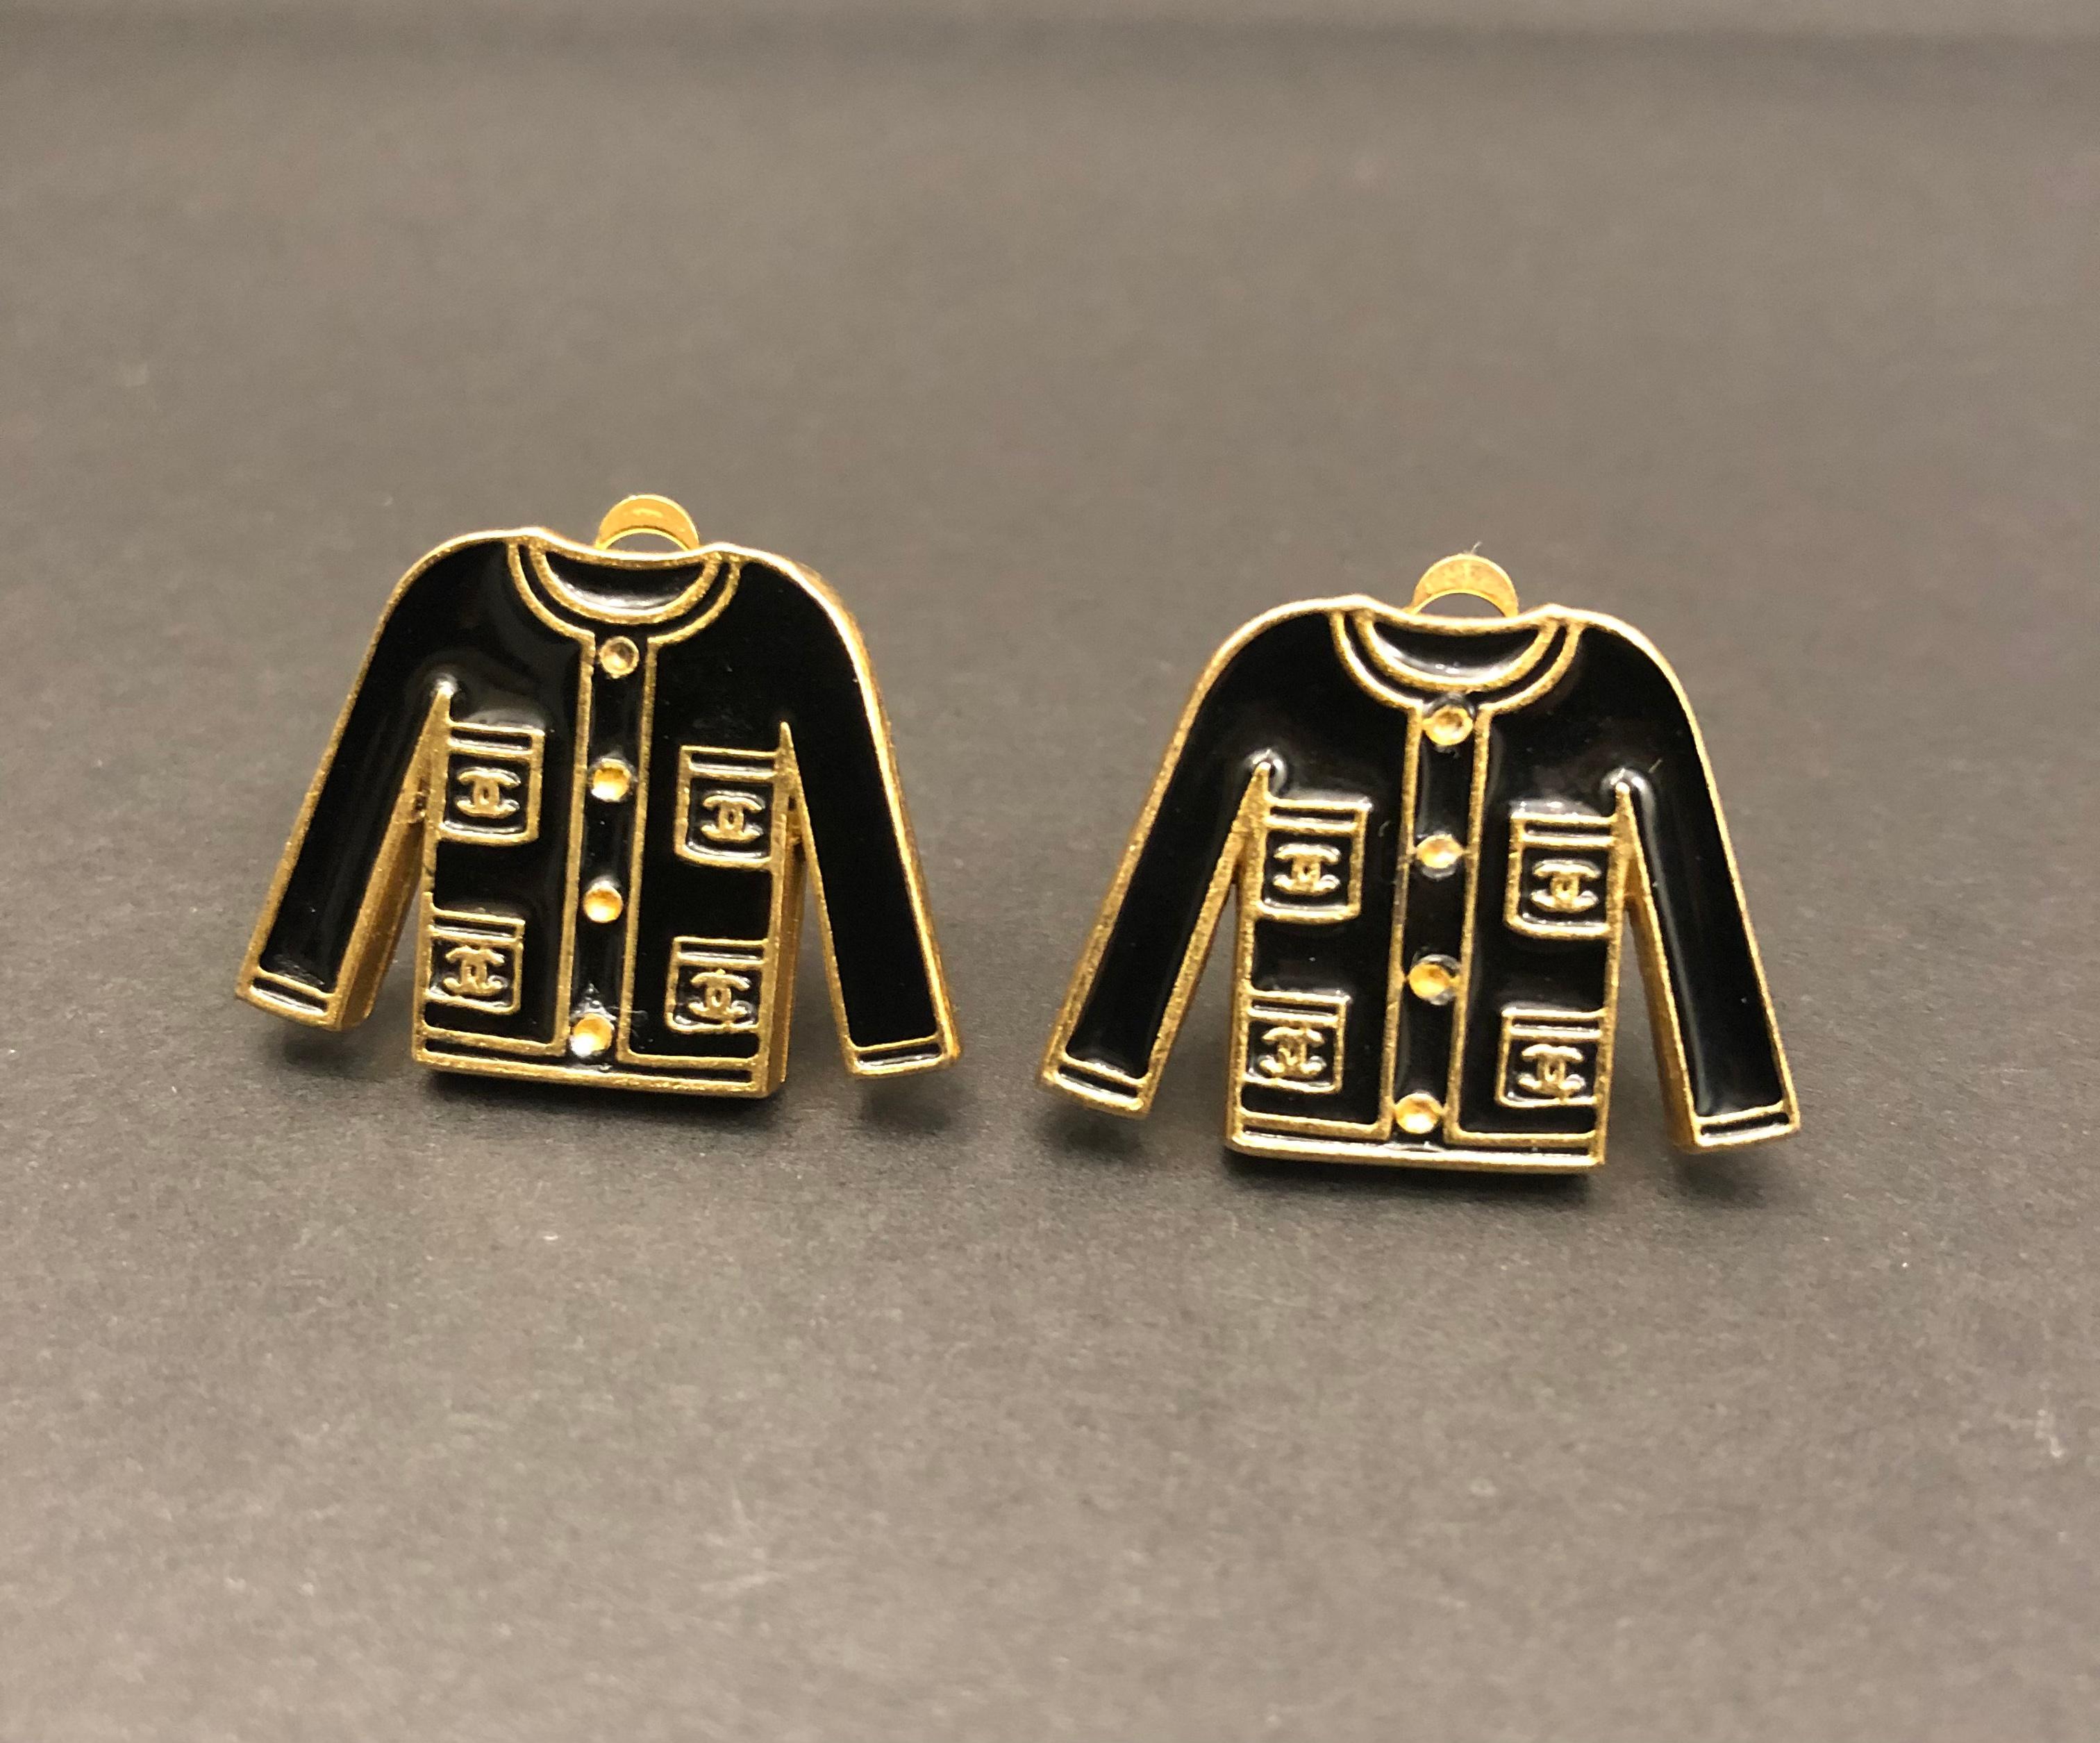 This vintage CHANEL earrings is crafted of gold toned metal and black enamel in Chanel jacket motif. Stamped Chanel 02A made in France. Measures approximately 2.6 x 1.9 cm. Clip-on style. Come with box. 

Condition: Very good vintage condition with